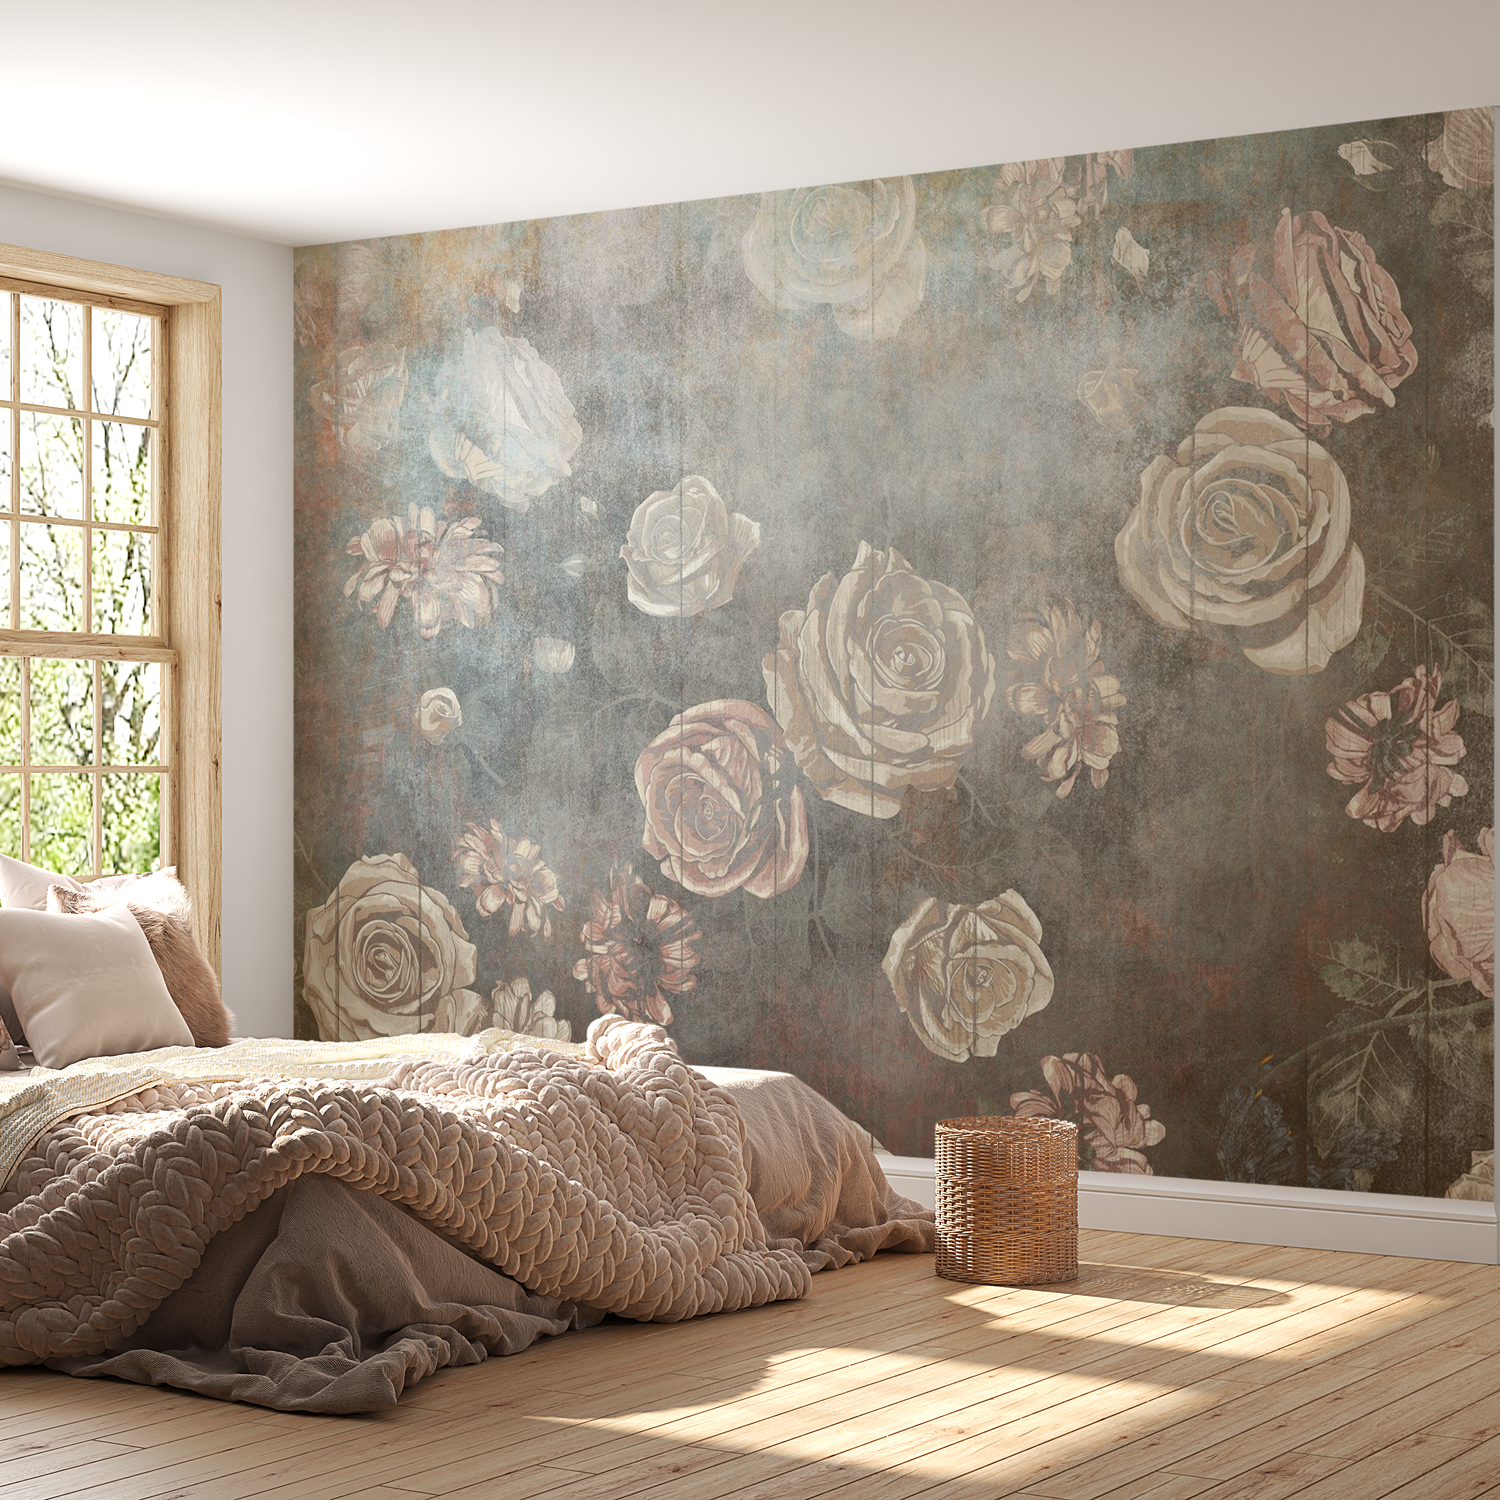 Peel & Stick Floral Wall Mural - Misty Roses - Removable Wallpaper 38"Wx27"H